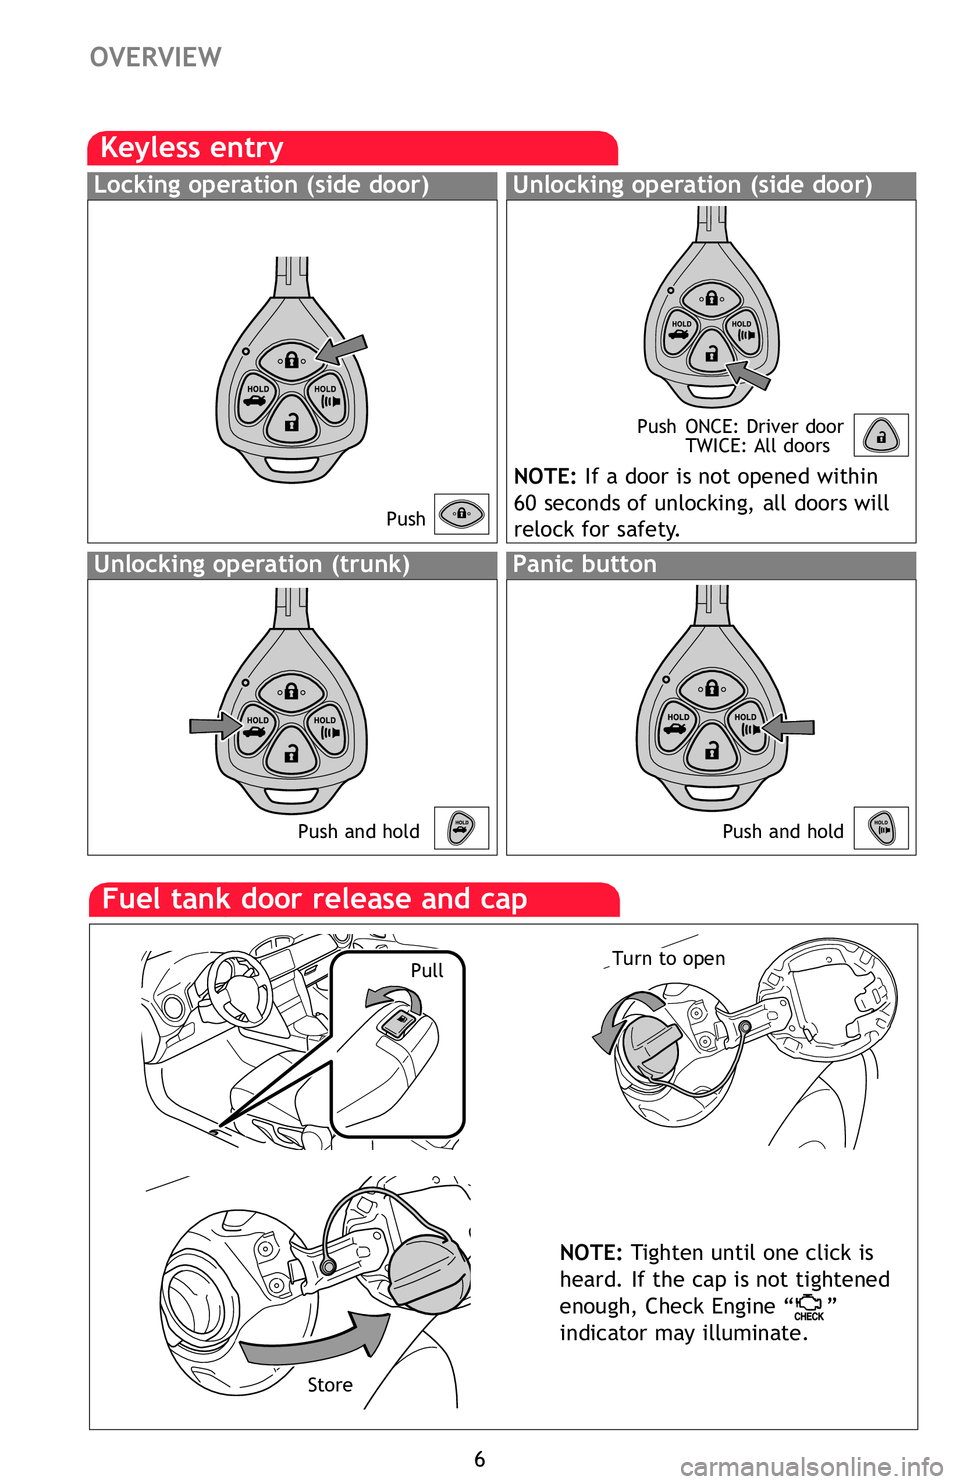 TOYOTA FR-S 2013  Owners Manual (in English) 6
OVERVIEW
Keyless entry
PushPush 
ONCE: Driver door
  TWICE: All doors
Locking operation (side door)Unlocking operation (side door)
NOTE: If a door is not opened within 
60 seconds of unlocking, all 